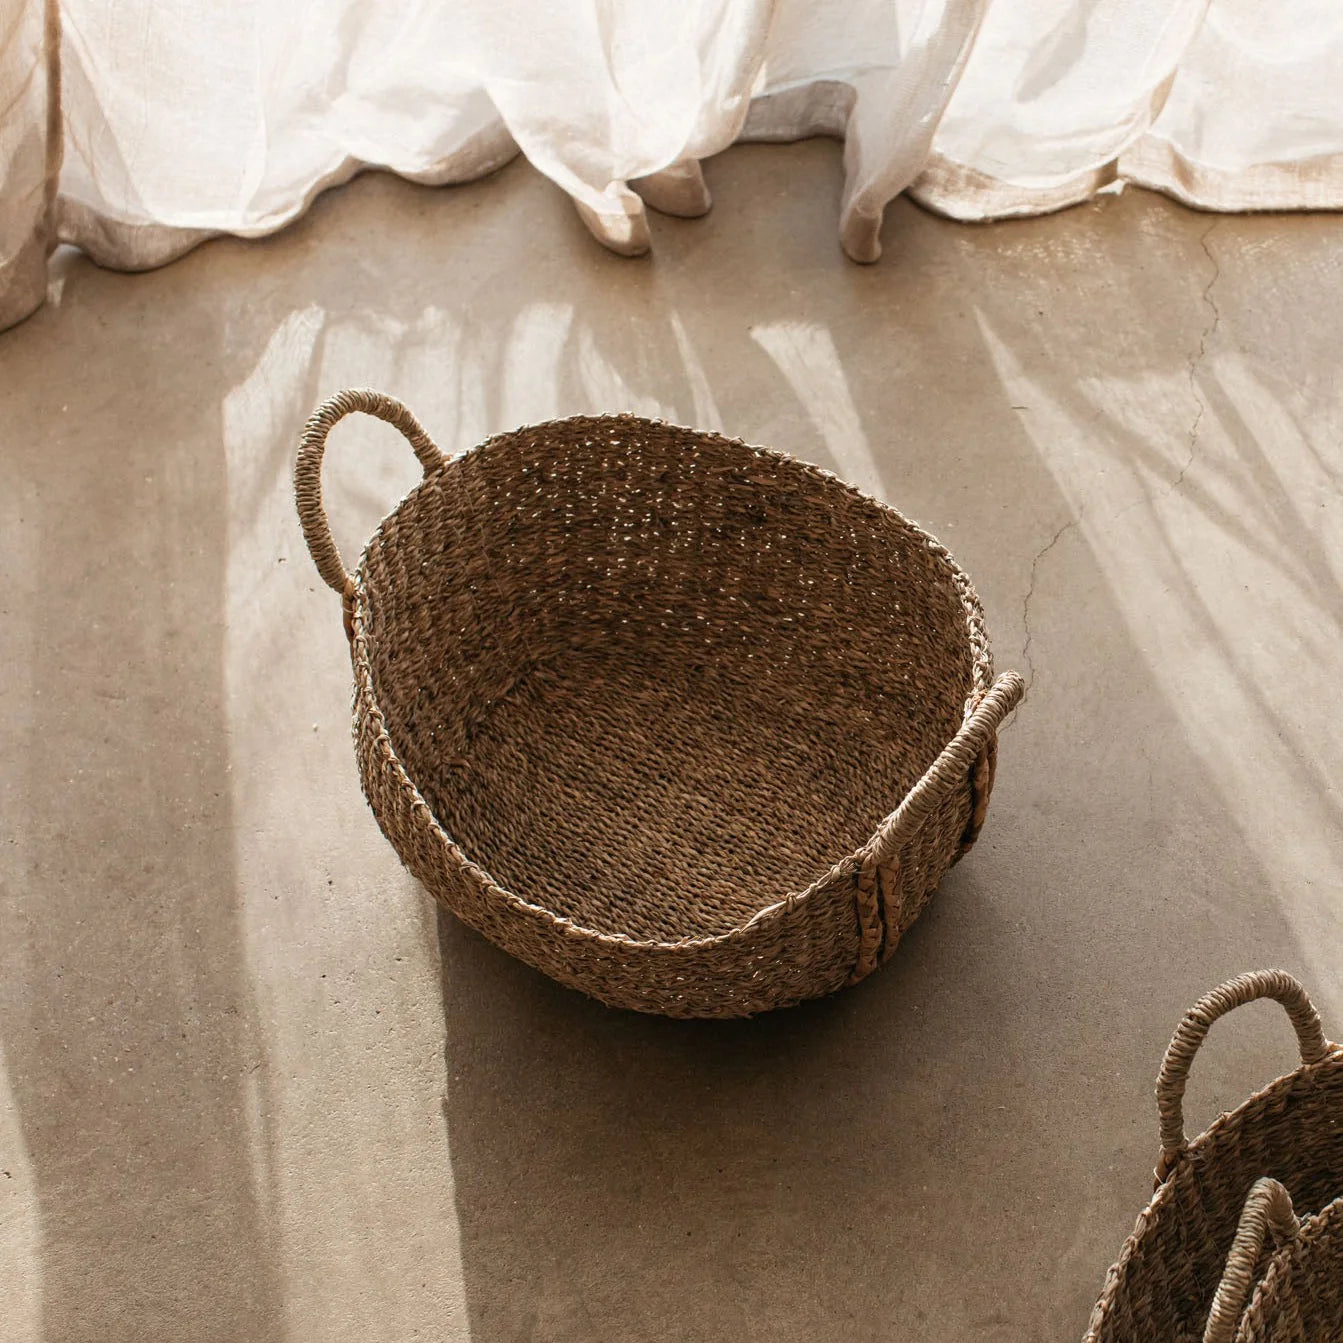 The Audrey oval seagrass basket on a cement floor with linen curtain in background.